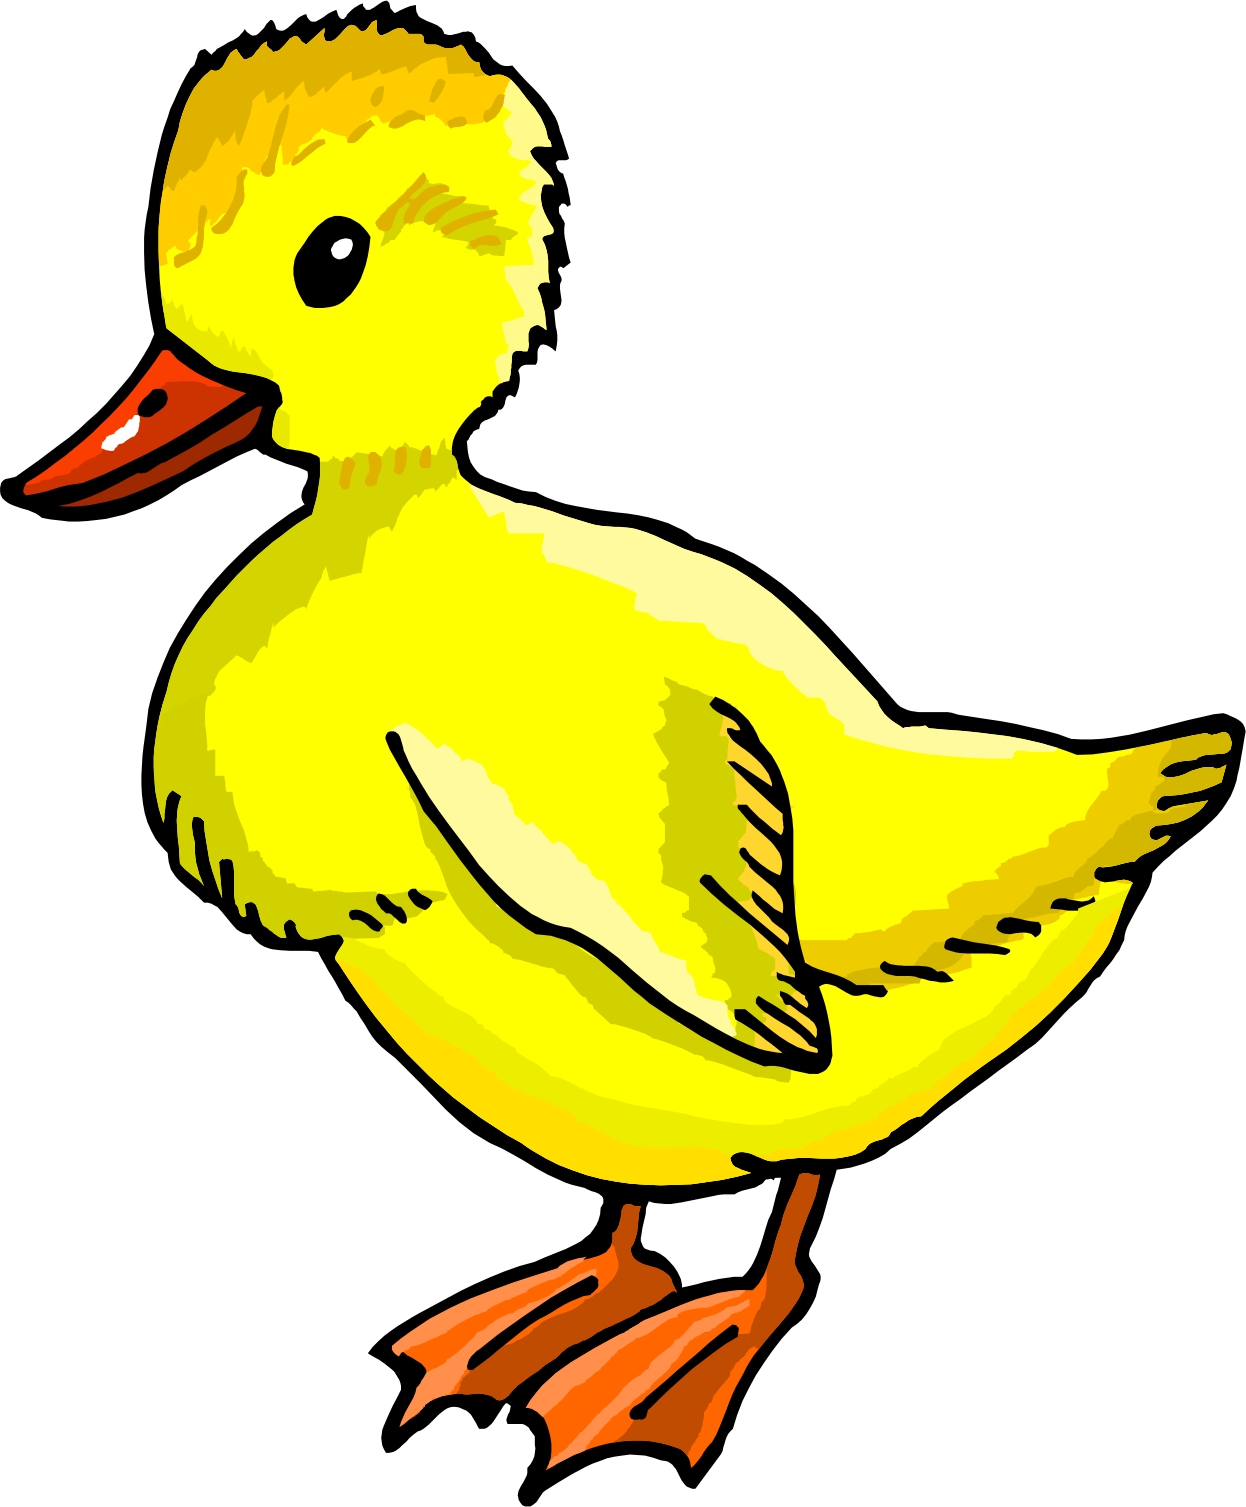 Duckling clipart #4, Download drawings